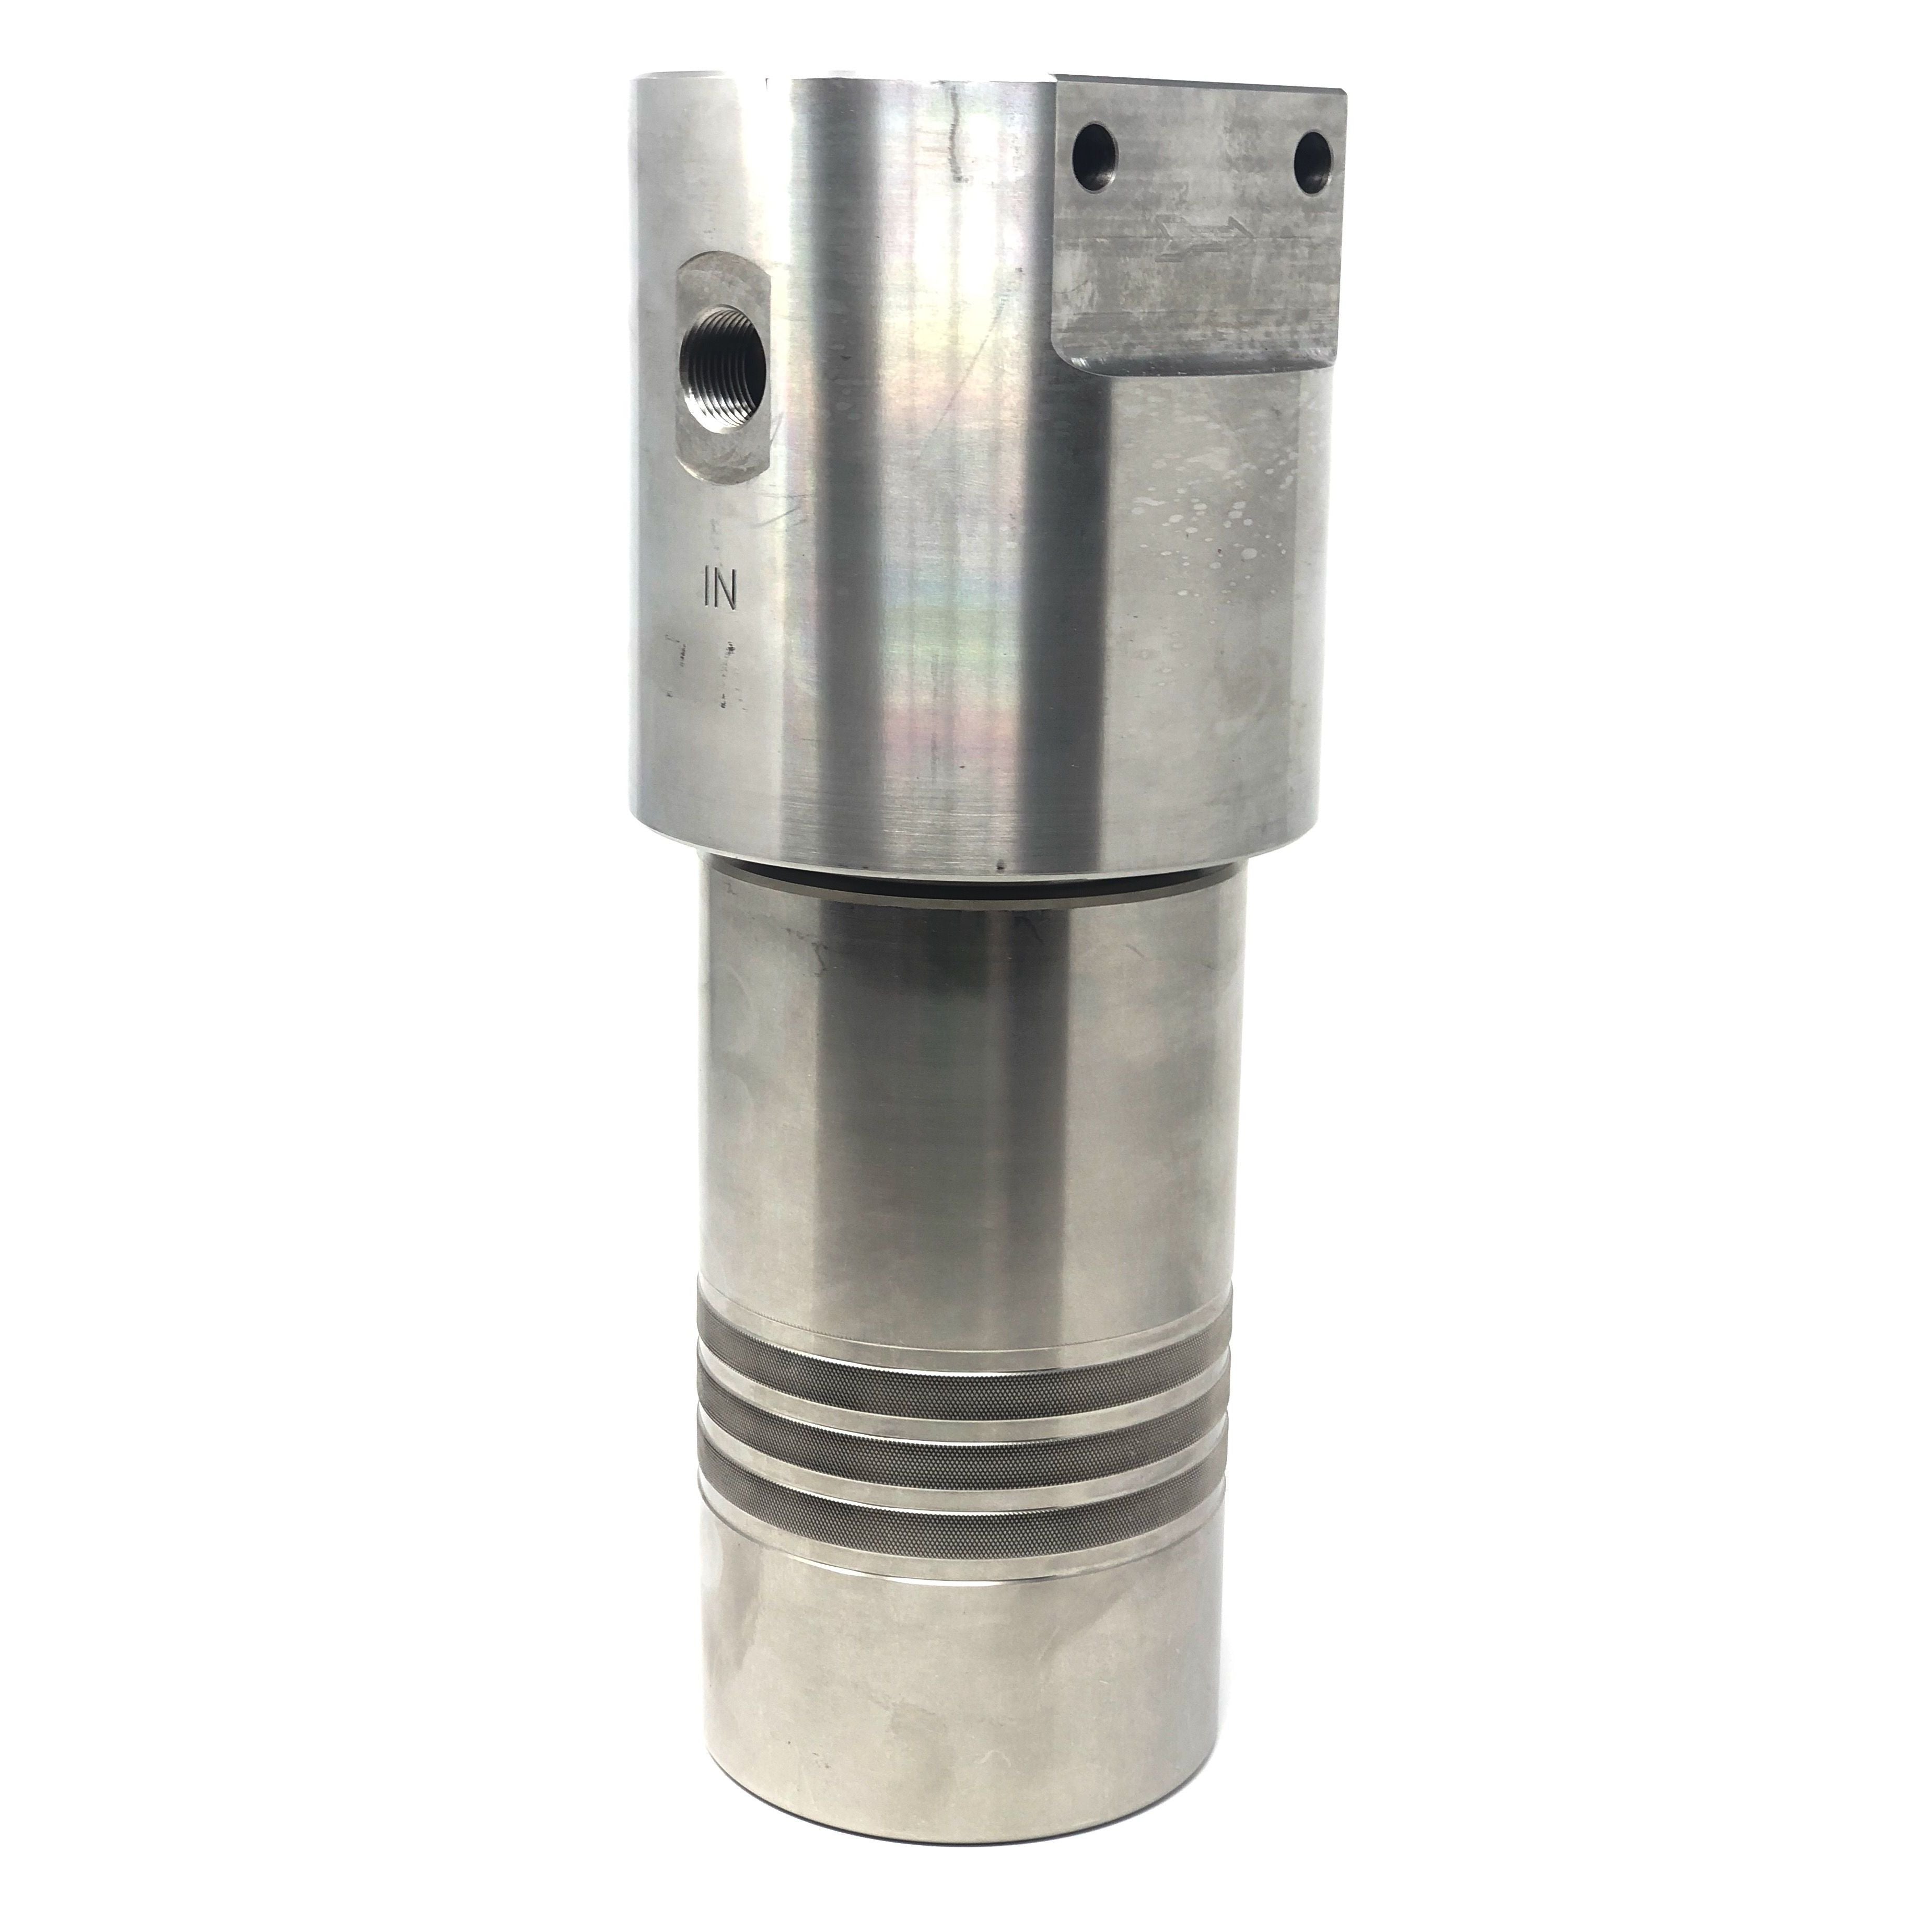 52S-246N-25SEN : Chase Ultra High Pressure Inline Filter, 10000psi, 3/8" NPT, 25 Micron, With Visual Indicator, No Bypass